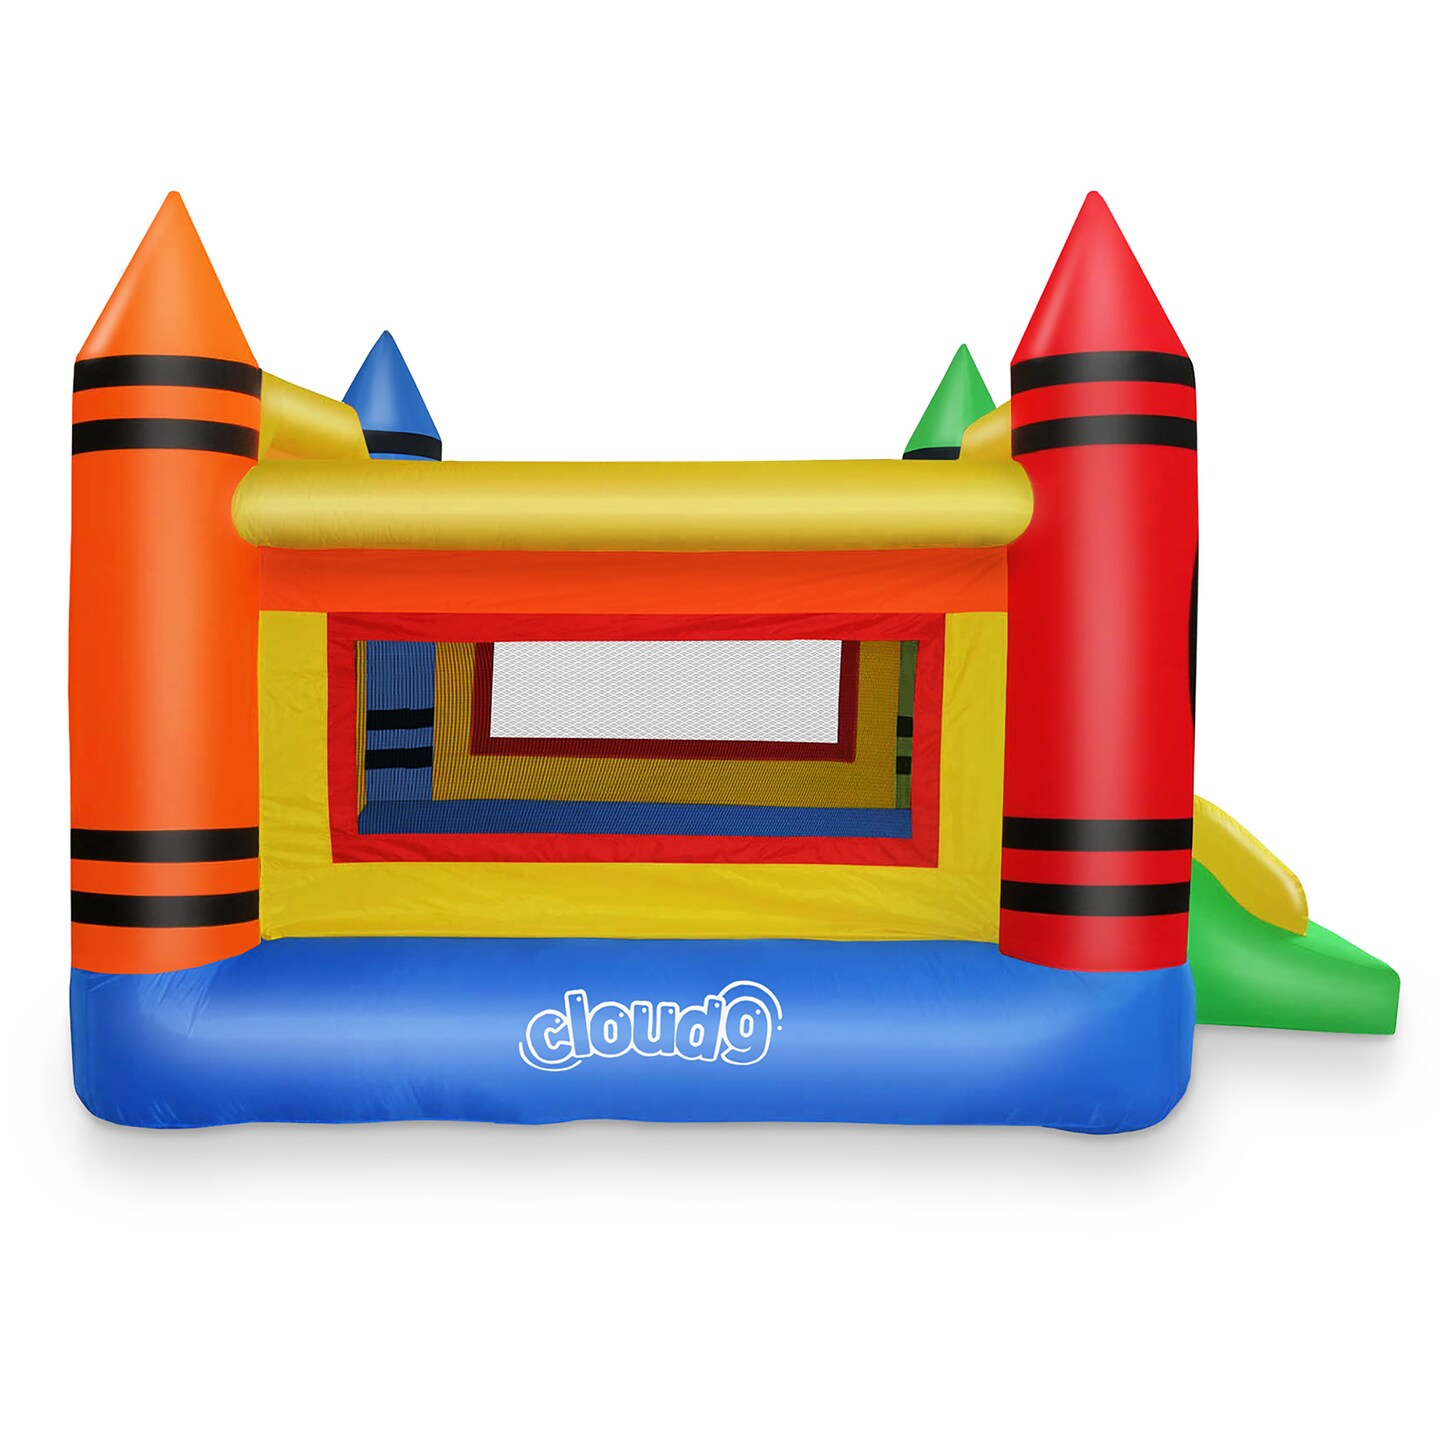 Cloud 9 Mini Crayon Bounce House with Blower - Inflatable Bouncer for Kids with Fun Slide